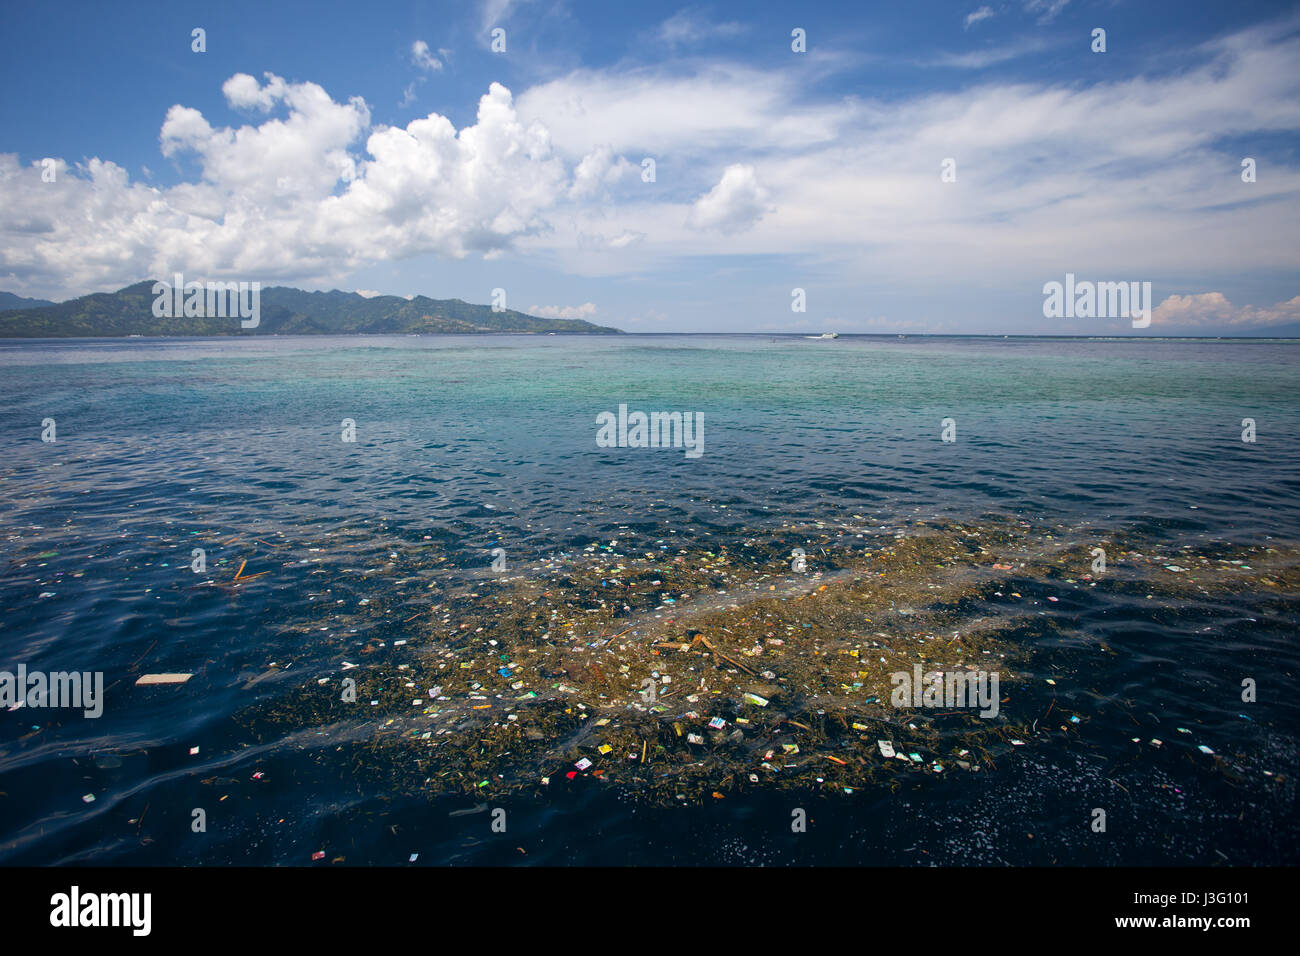 The sea of floating debris, the problems of nature and environment Stock Photo